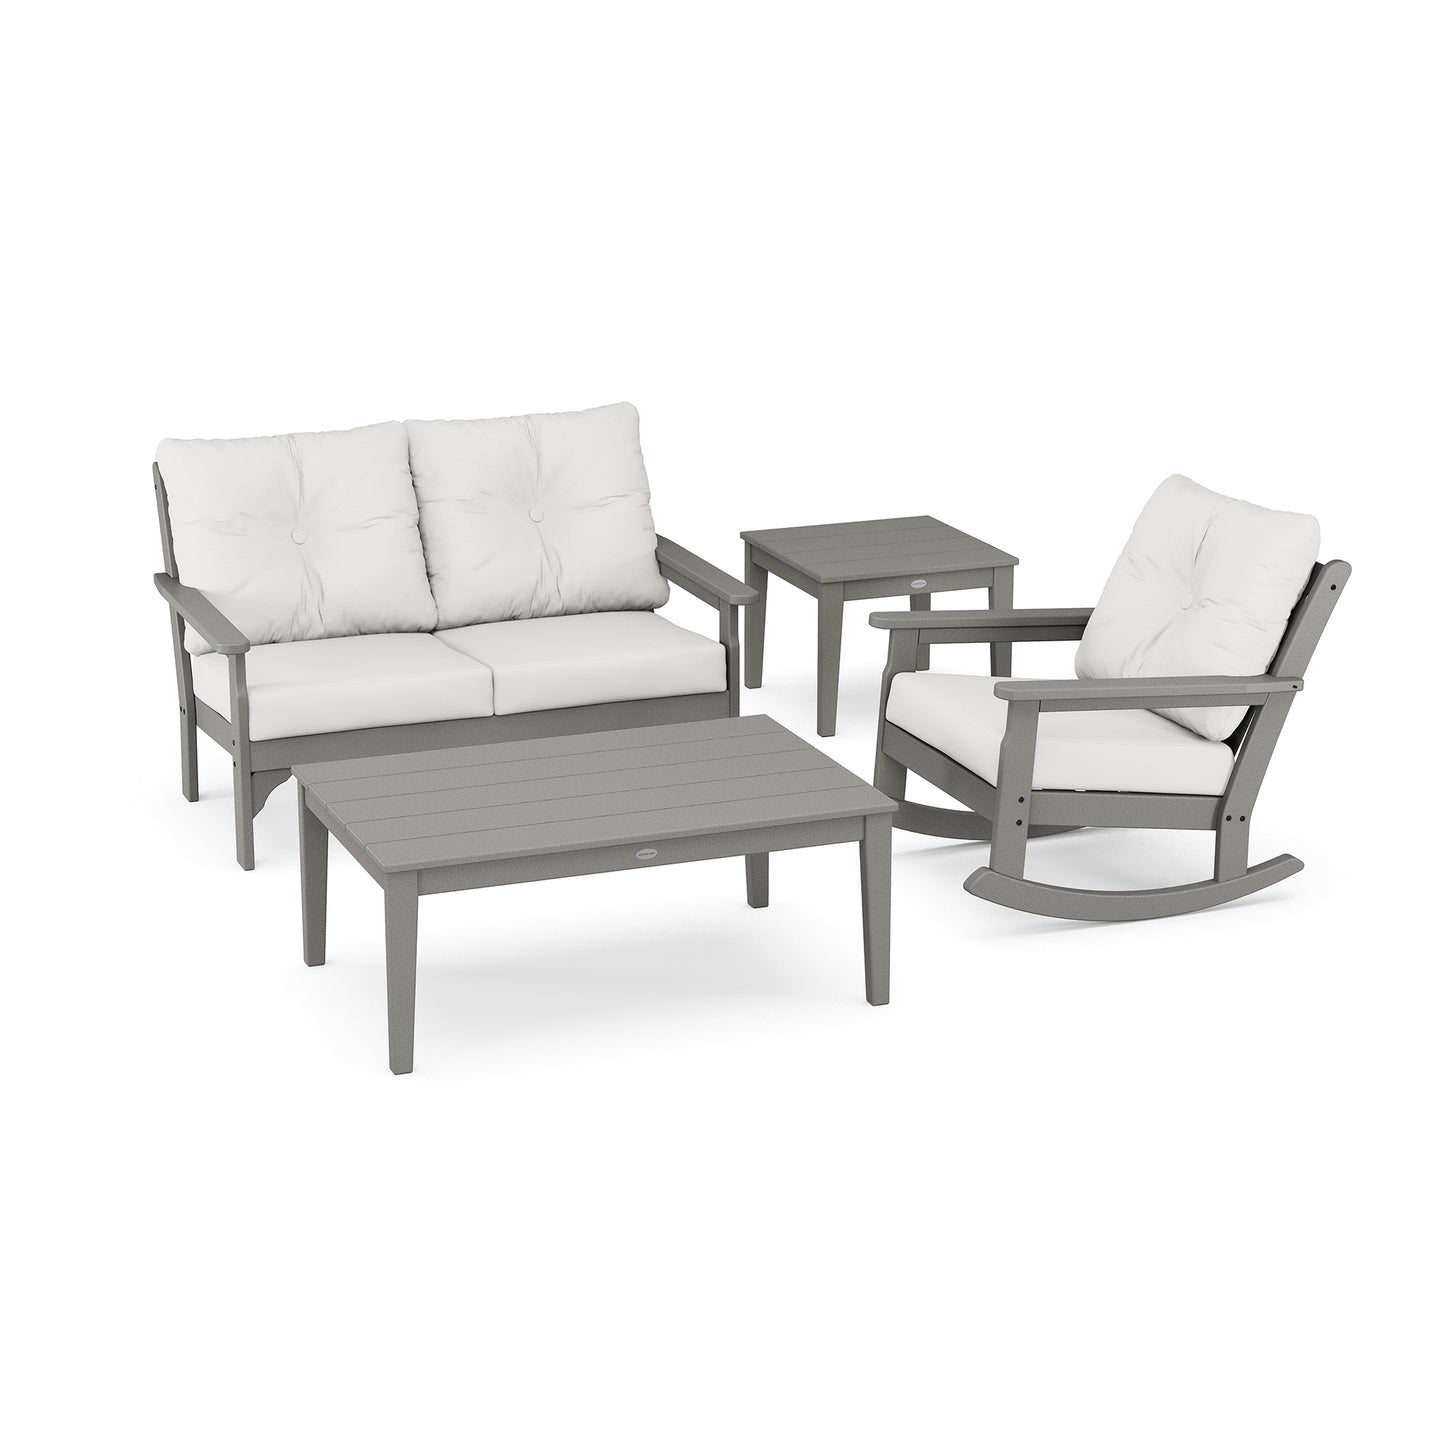 Outdoor furniture set on a white background, including a sofa with cushions, a rocking chair, and two matching tables. All pieces are from the POLYWOOD Vineyard 4-Piece Deep Seating Rocker Set.